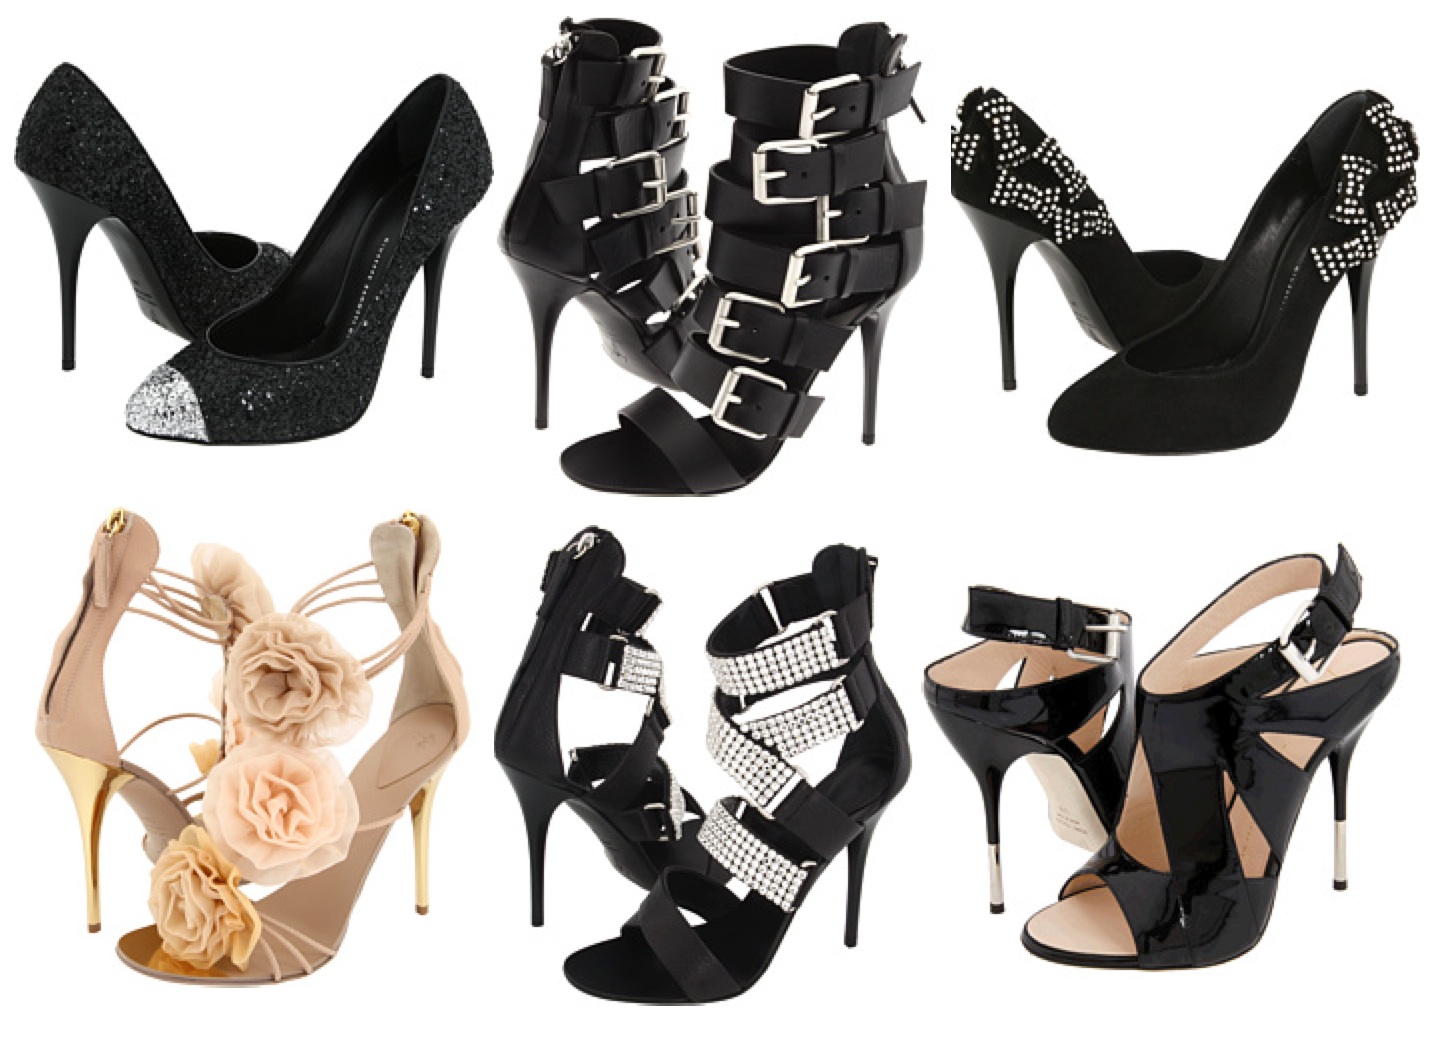 Giuseppe Zanotti heels available at couture.zappos